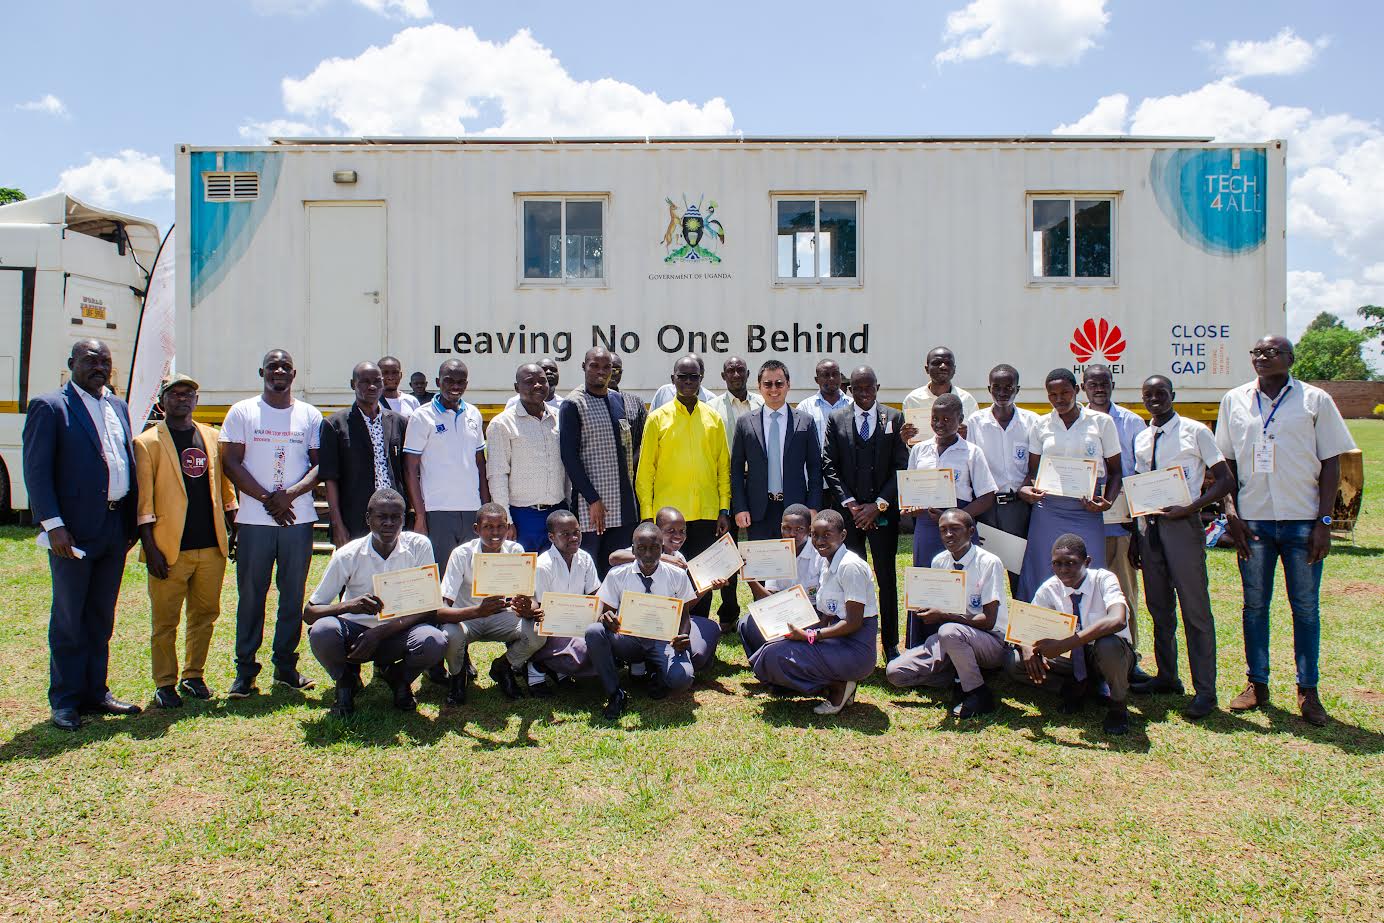 Chief Whip Obua hails Huawei’s DigiTruck for boosting digital inclusion in Lango